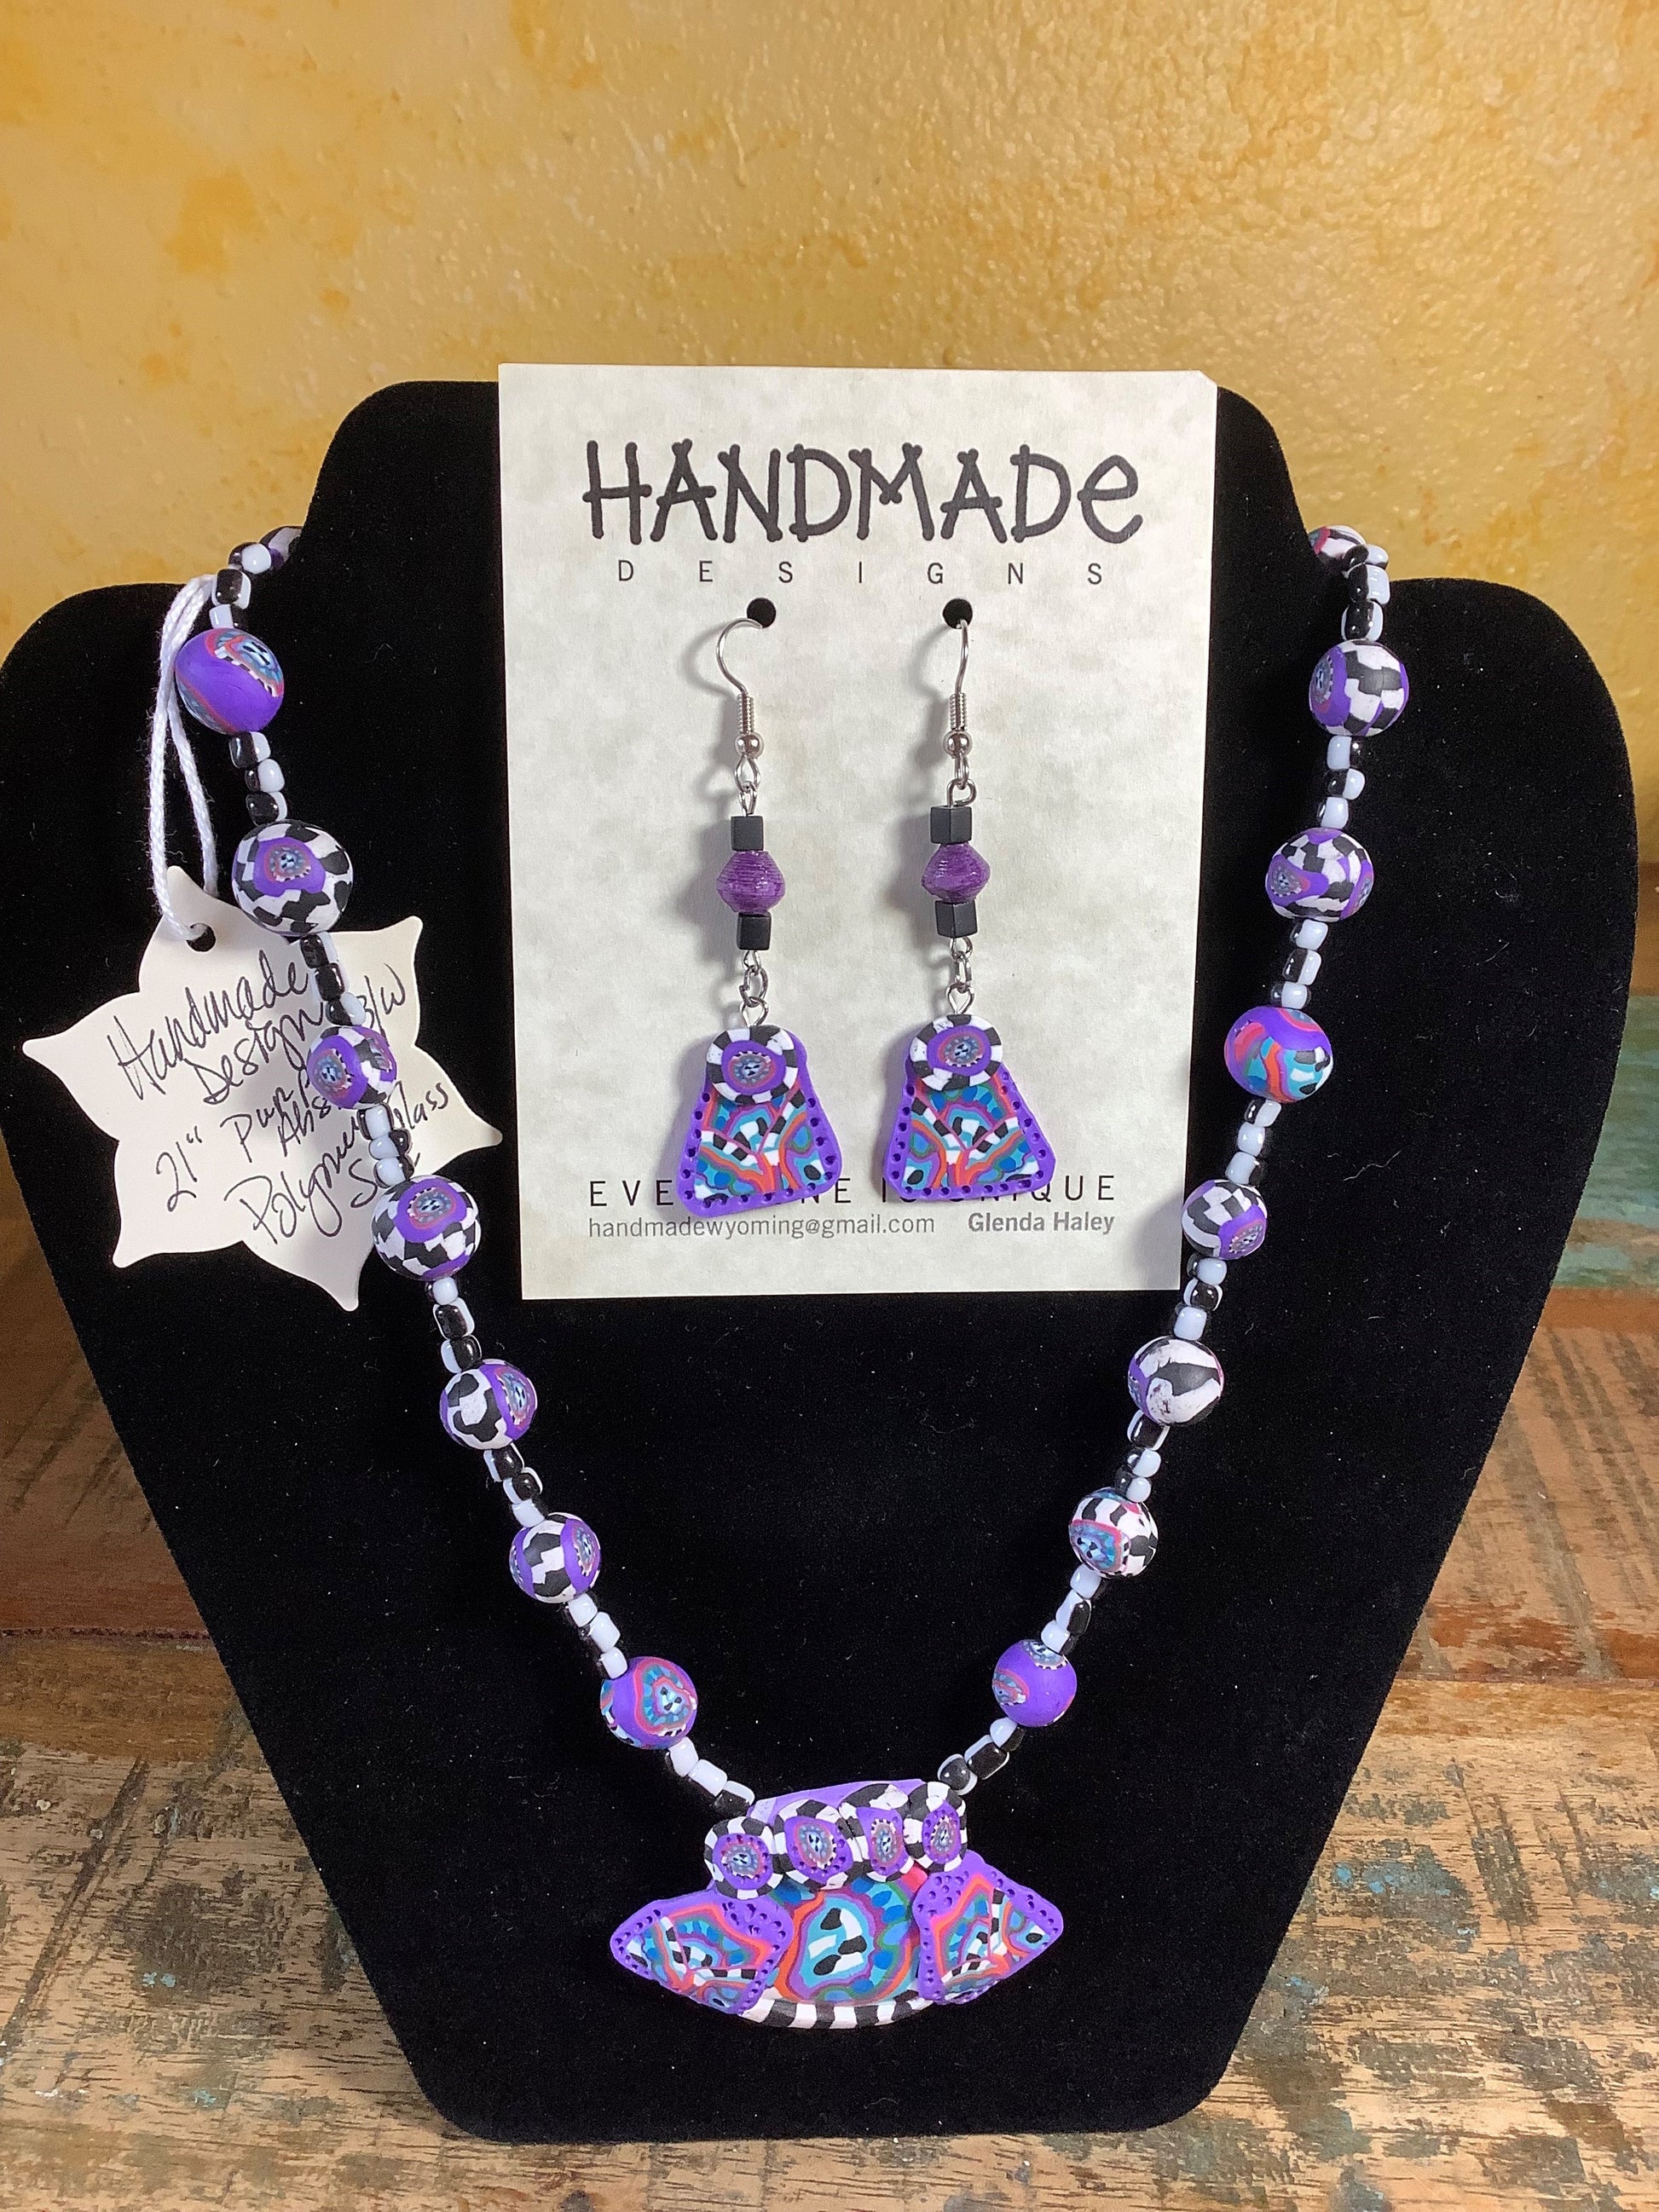 Variety Mixed Colors Polymer Clay Necklace and Earring Set Artist: Glenda Haley  Original, handcrafted Necklaces with matching Earrings  Created from Polymer Clay in Yellow, Orange and Purple swirls  The Earrings are drop beads from matching clay  Polymer Can Techniques  Purple, black and white Beads are hand made. Necklace is 21"  Glass accent beads